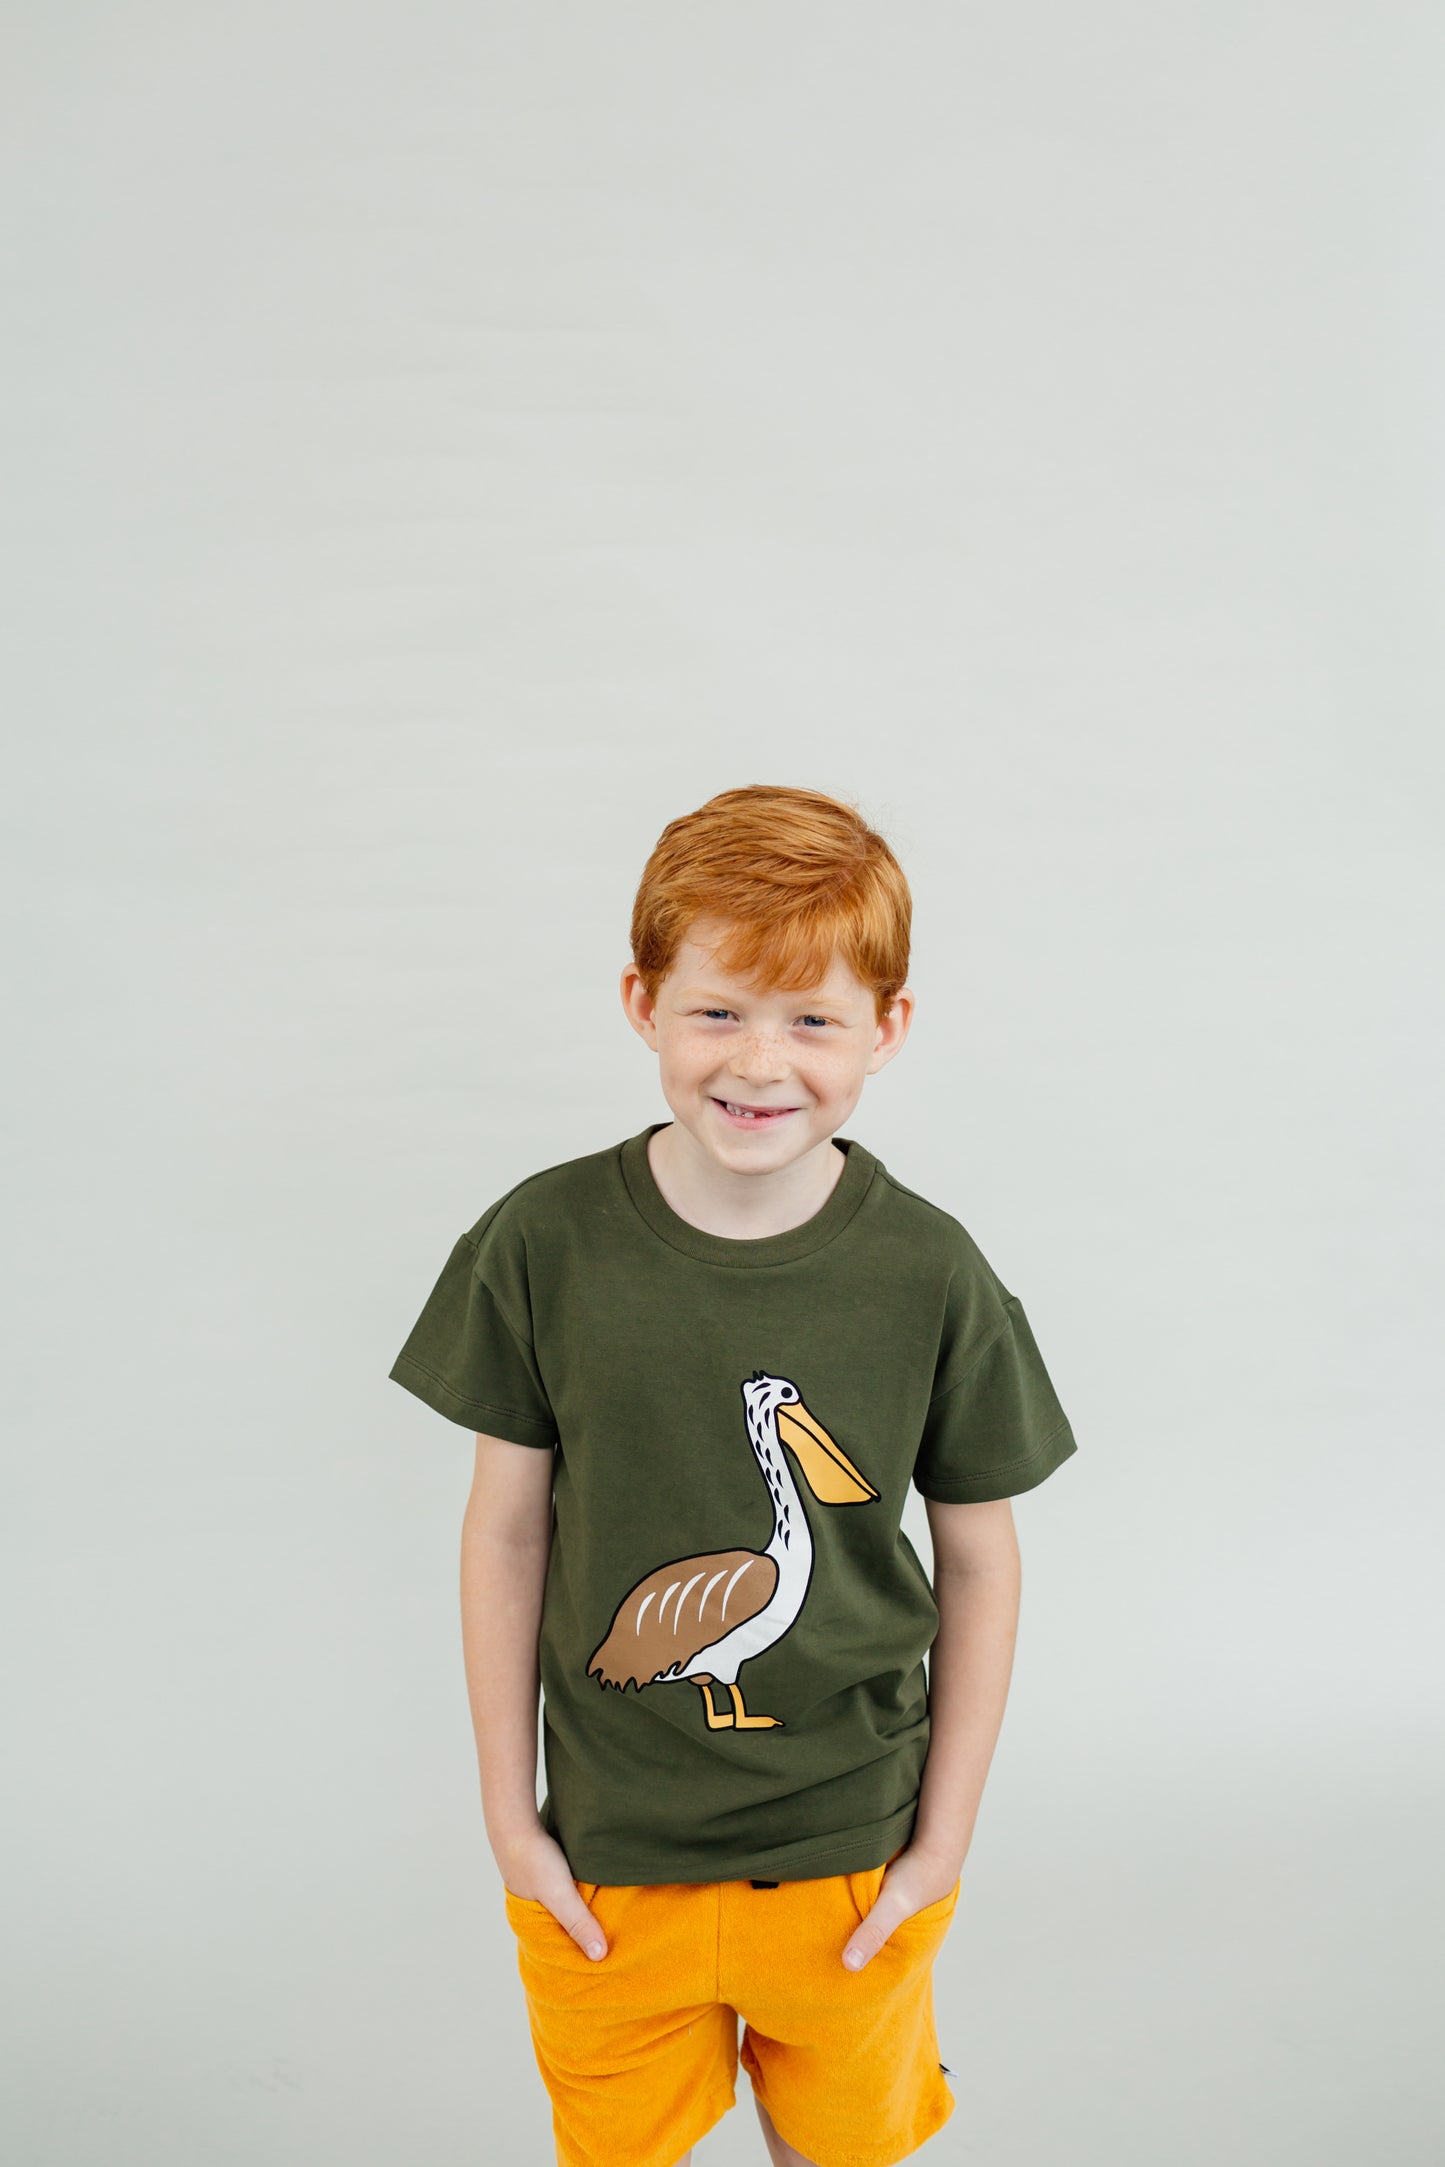 Pelican T-Shirt (1-2 and 3-4 left)